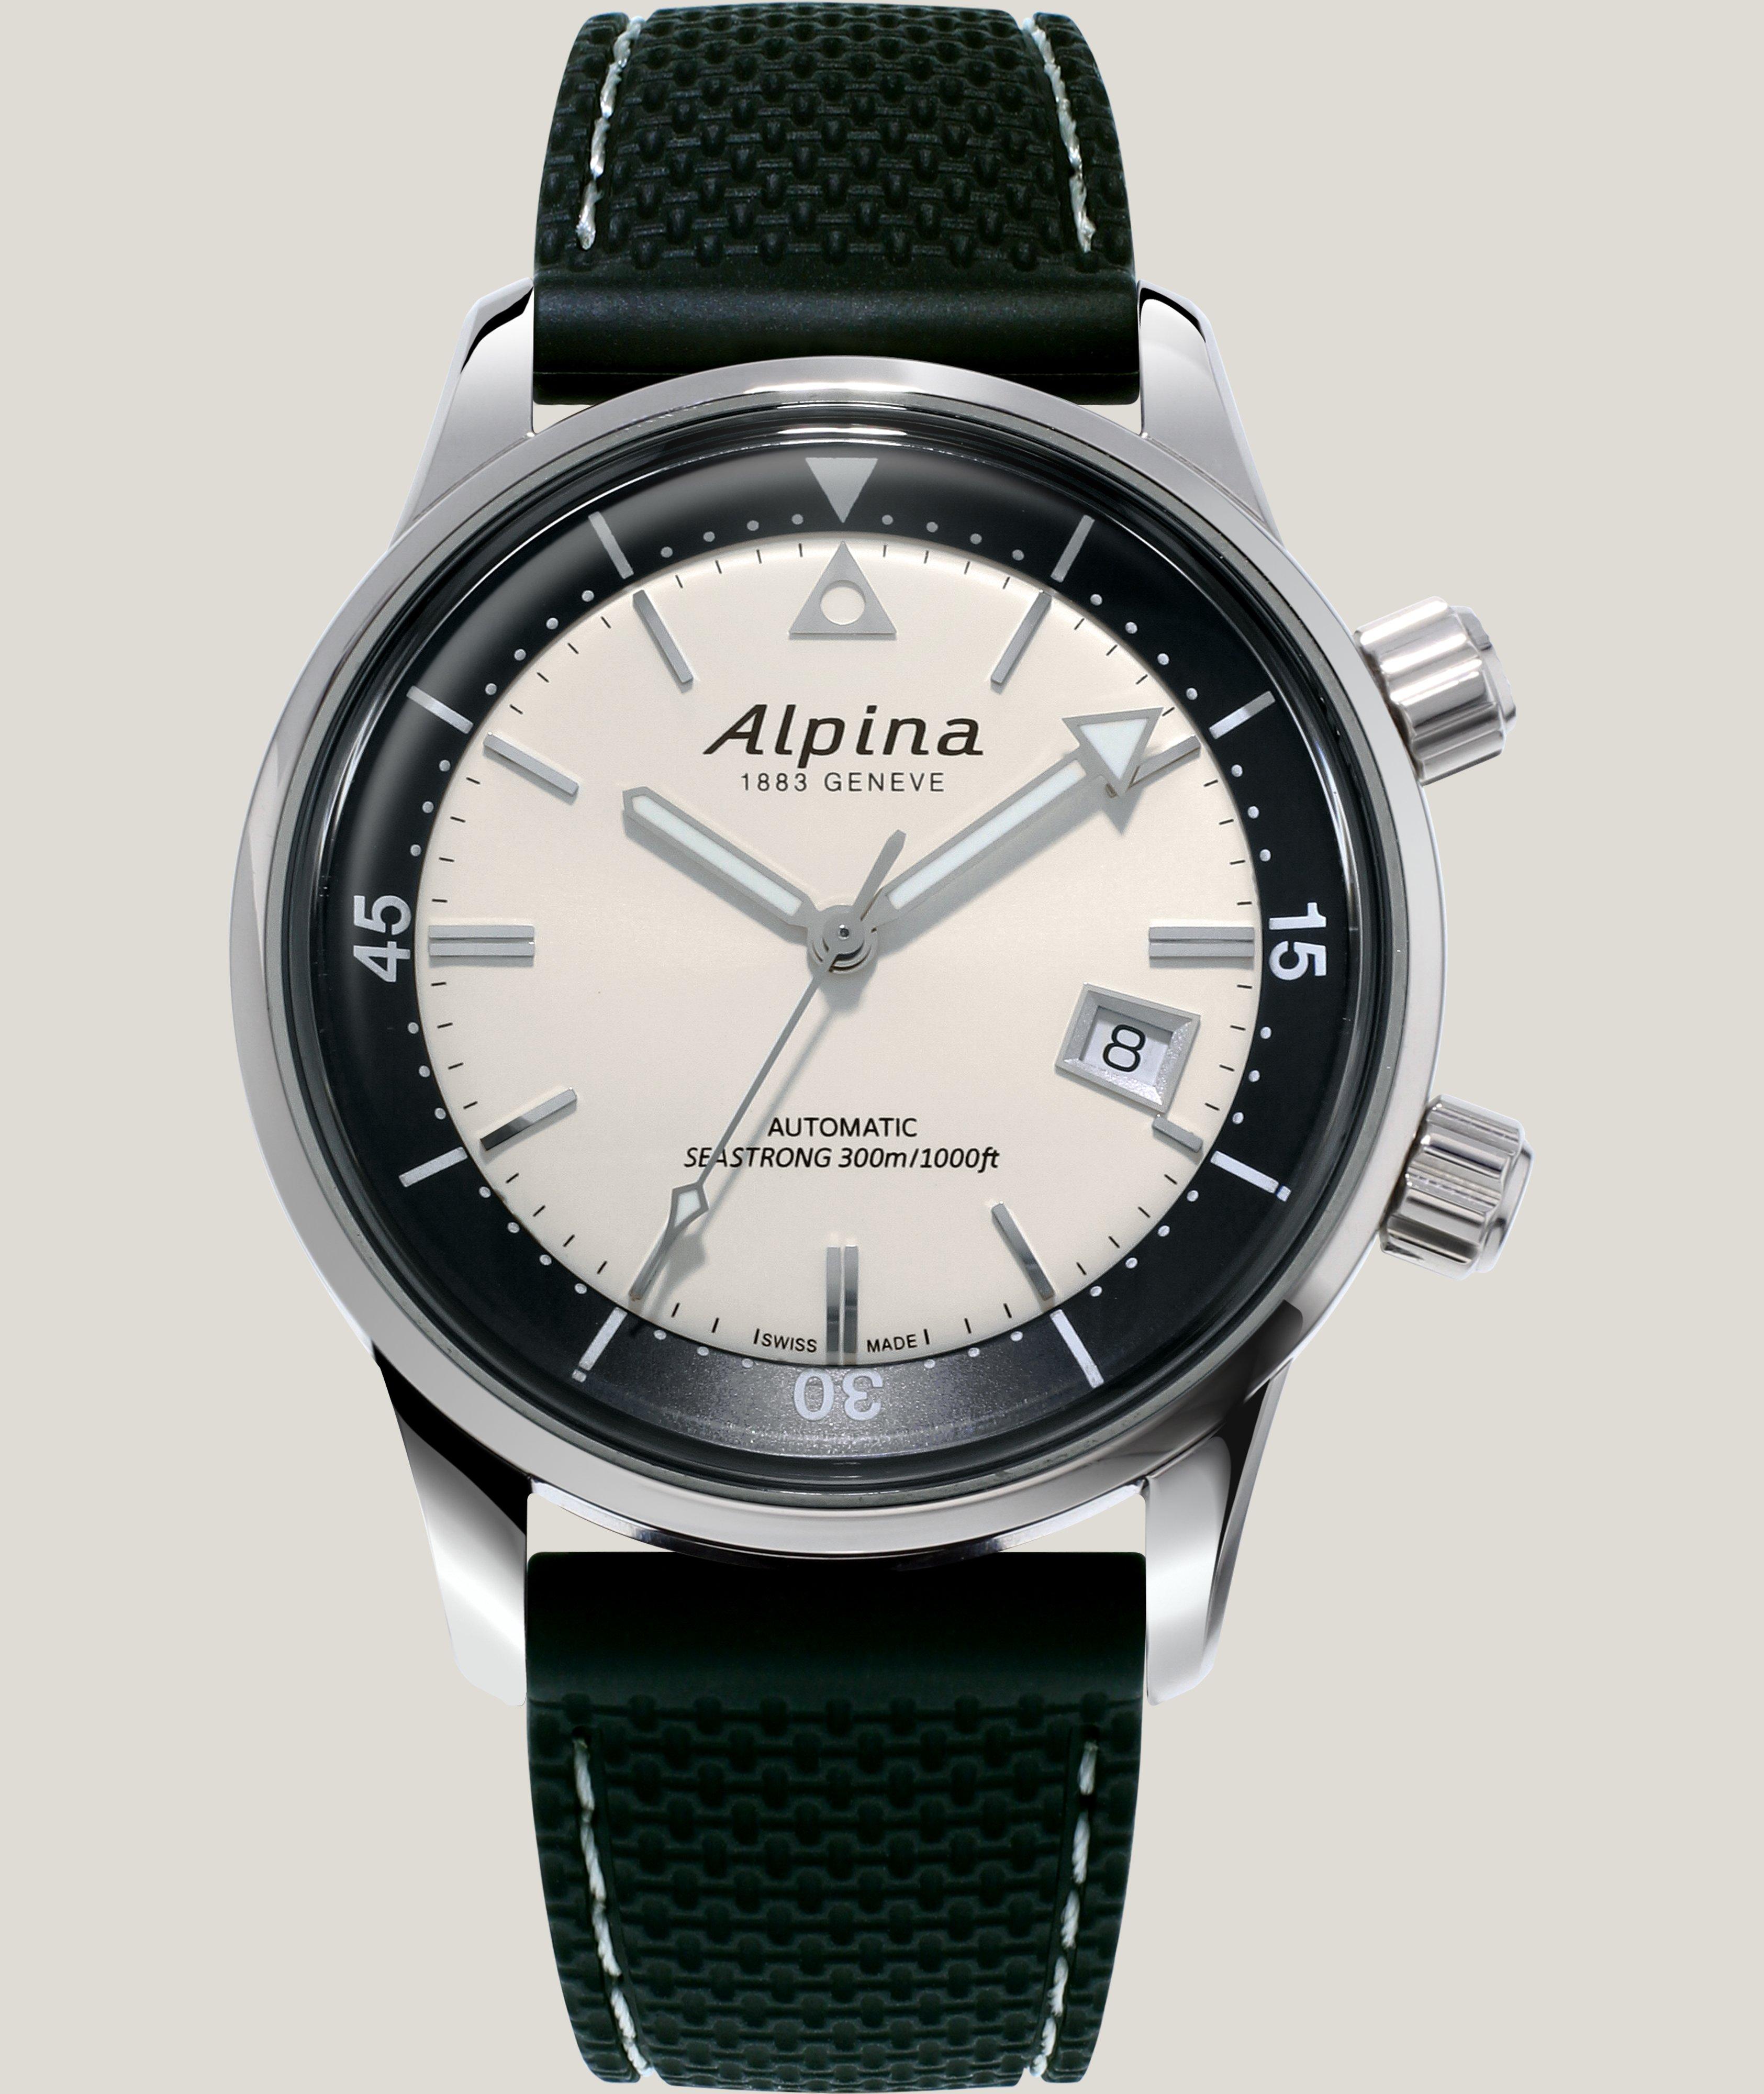 Alpina Seastrong Diver 300 Heritage Watch | Watches | Harry Rosen